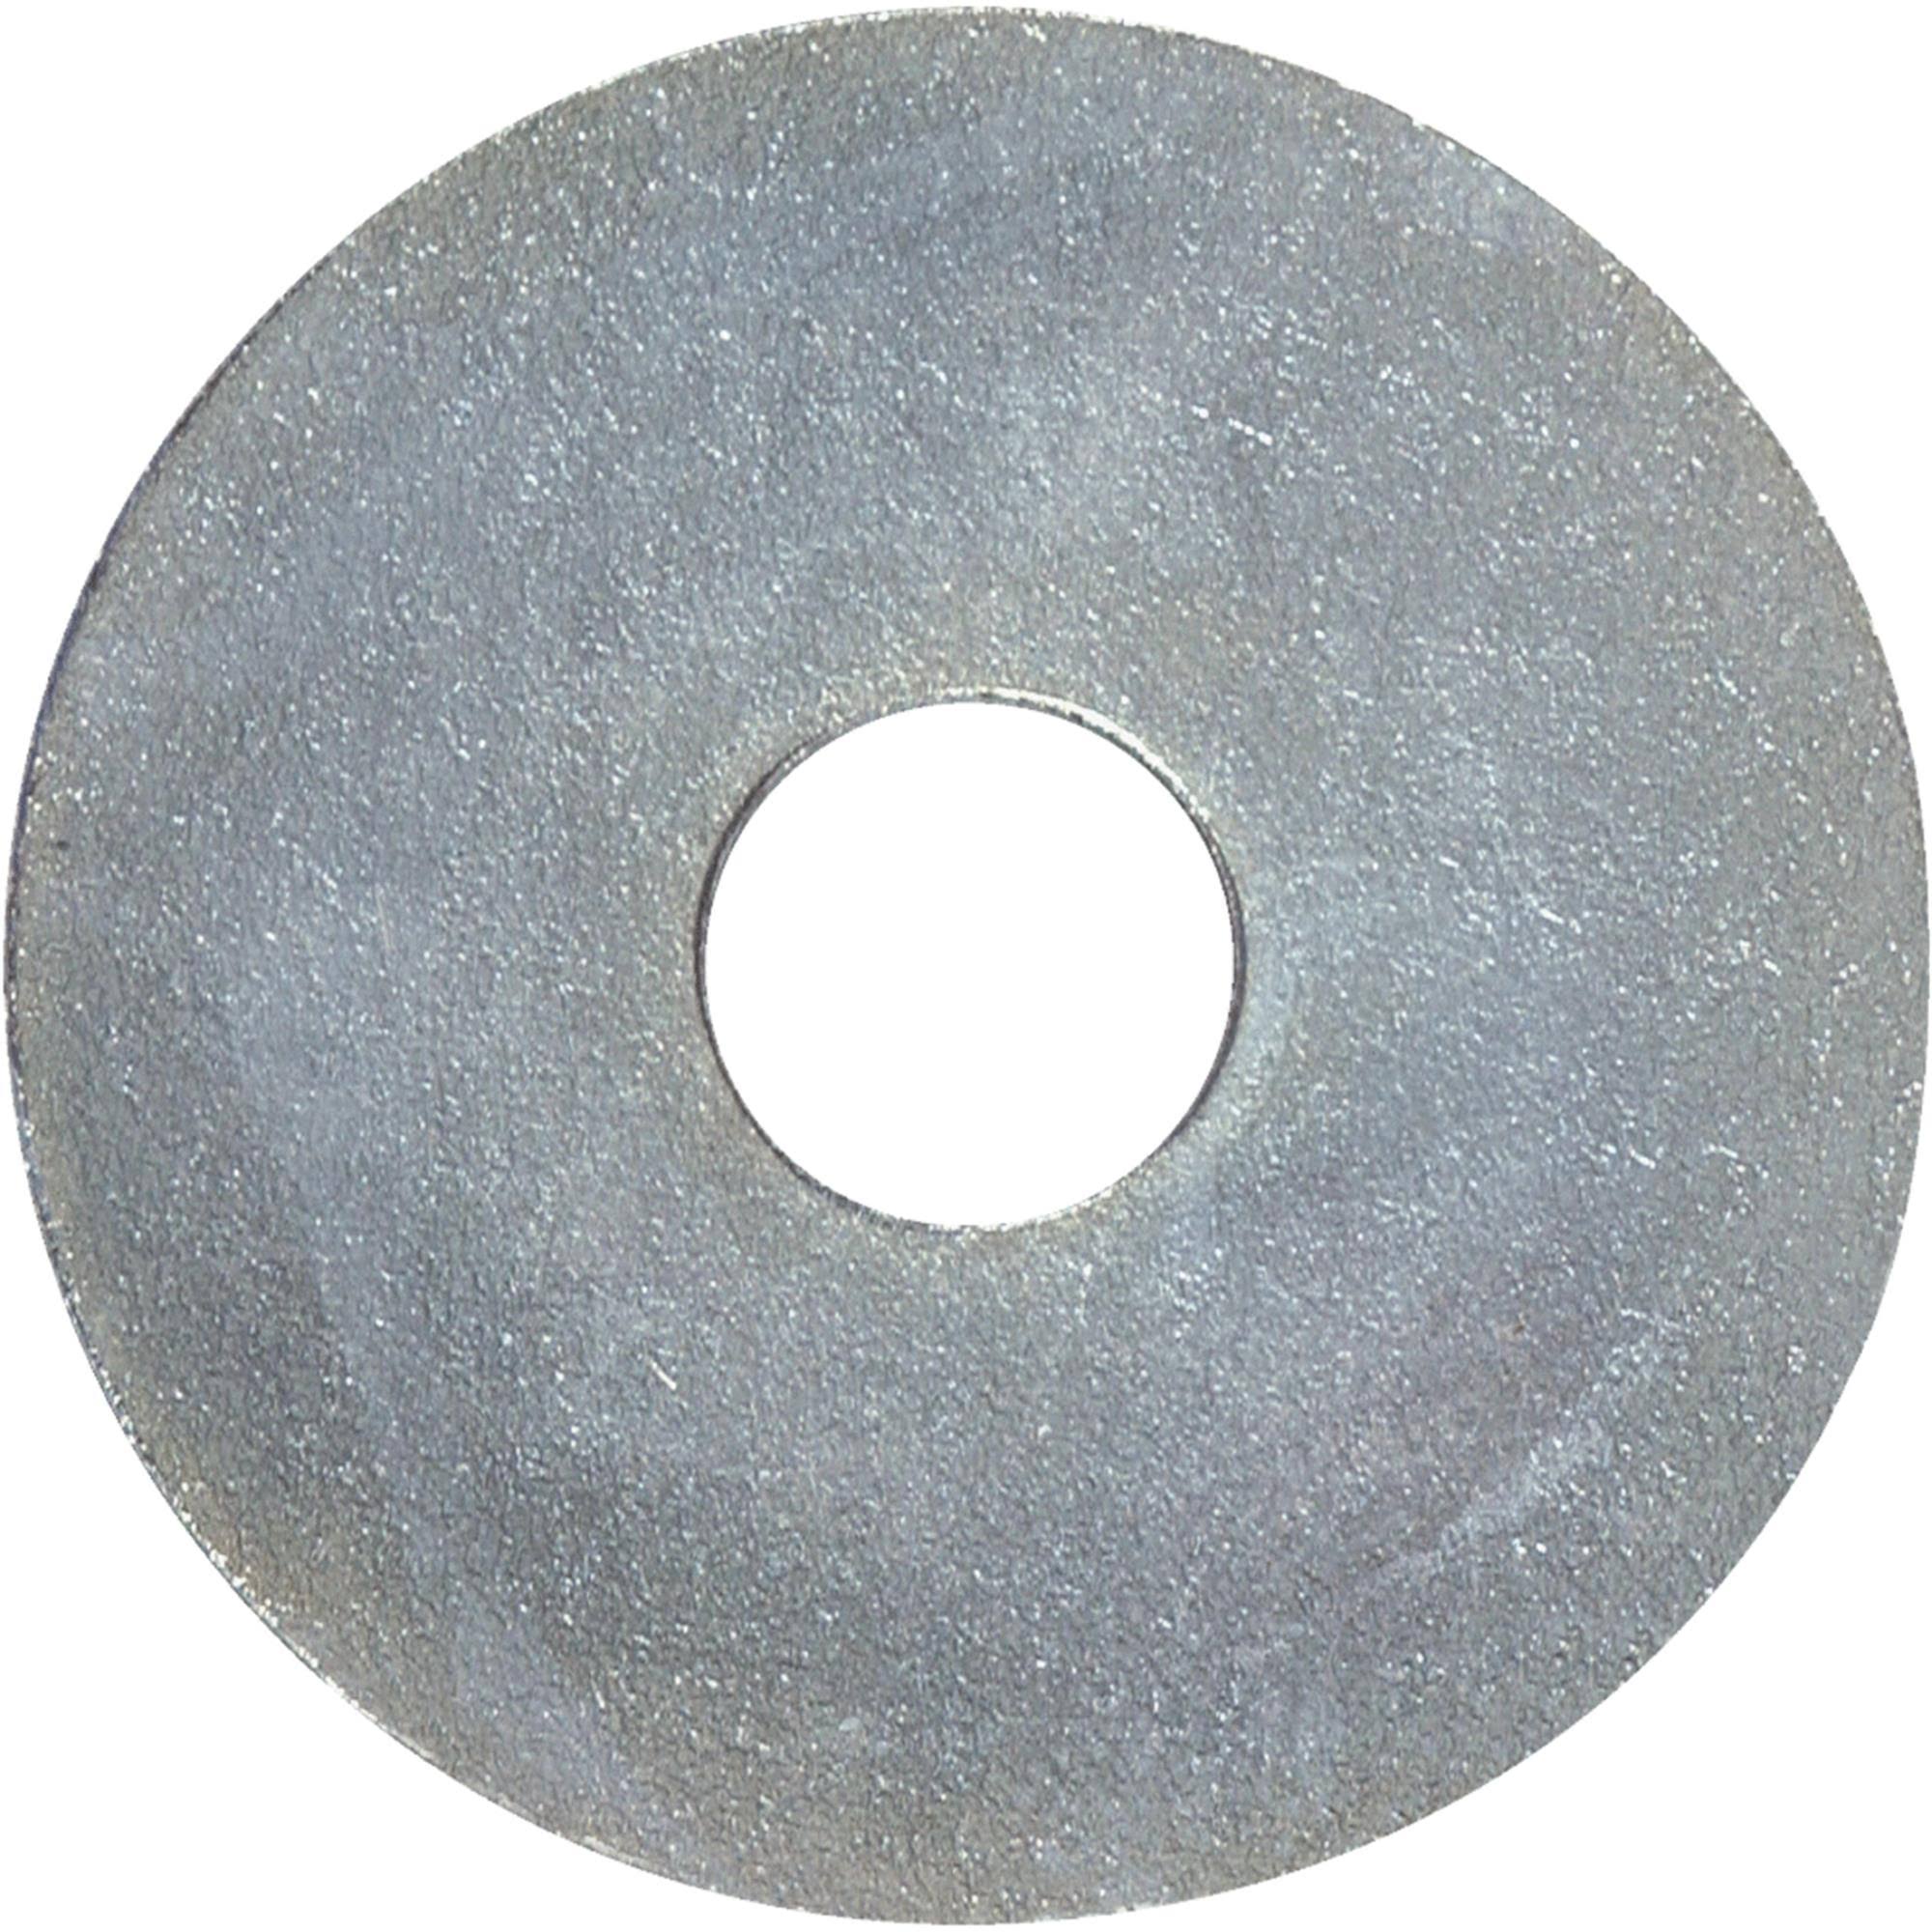 The Hillman Group Fender Zinc Washers - 5/32" x 7/8", 100 Pack